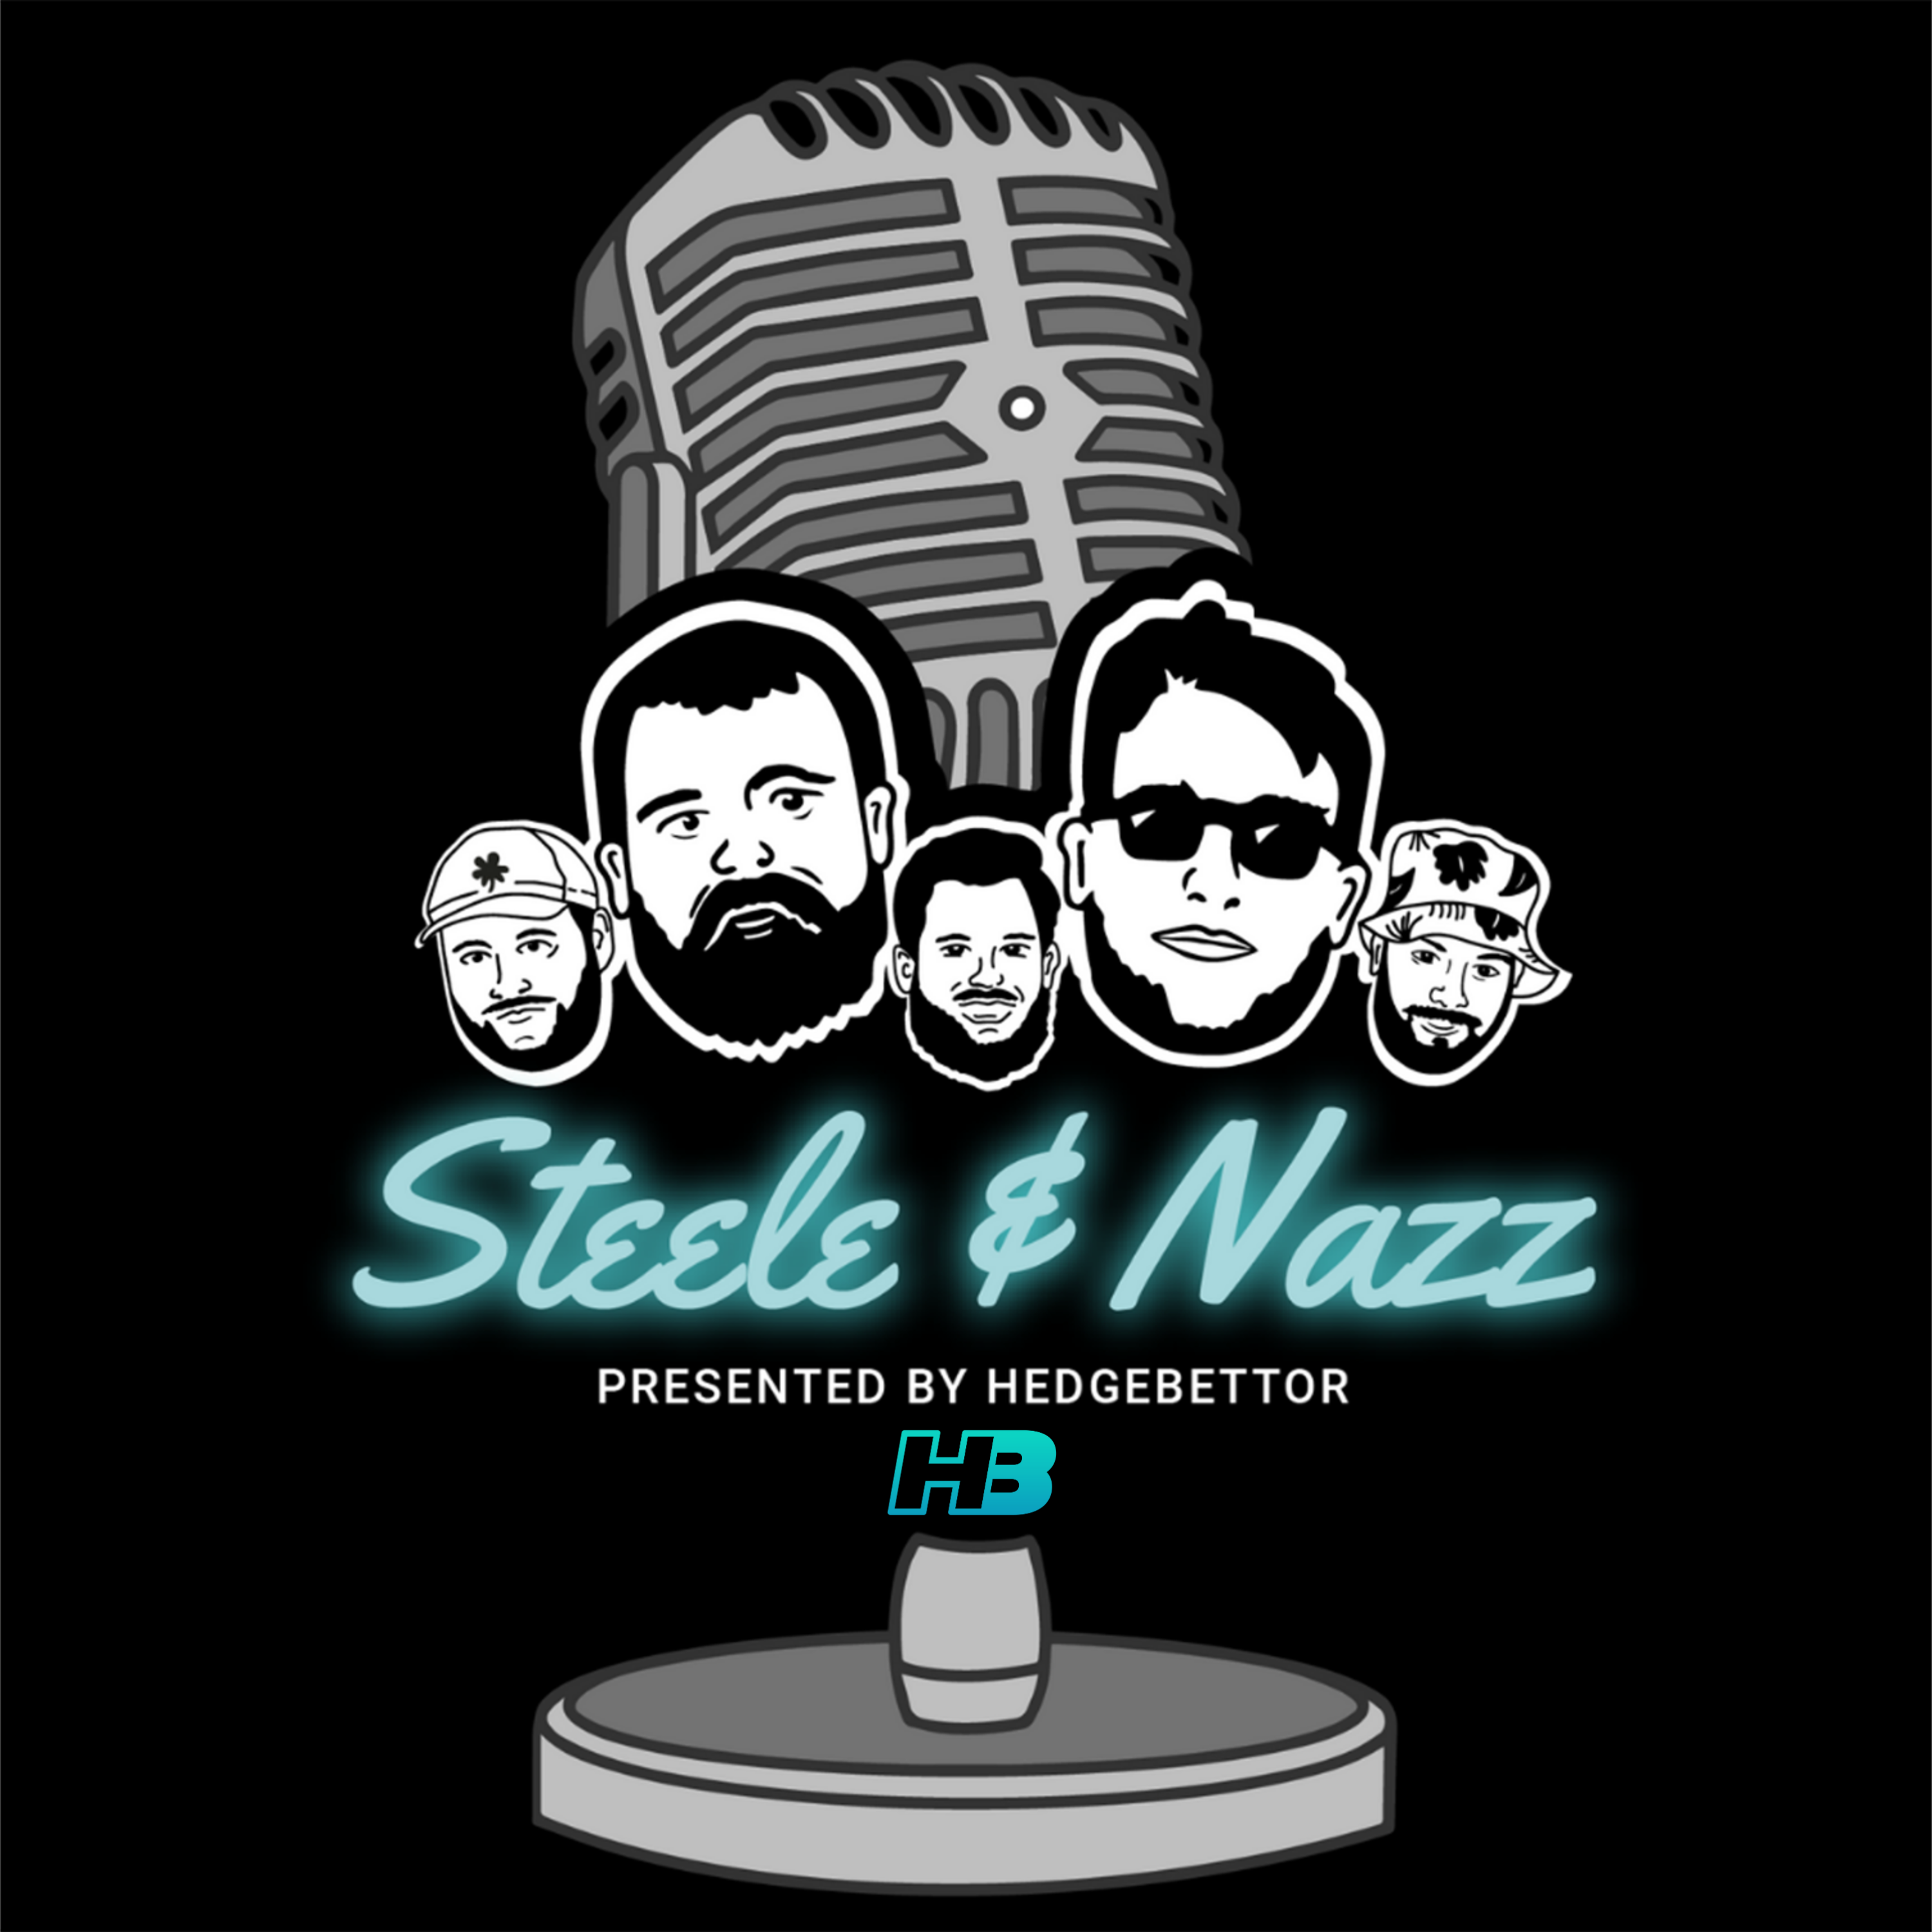 Ep. 119 - NFL Agent Zac Hiller, Mac Jones out of New England? UFC 287 Preview